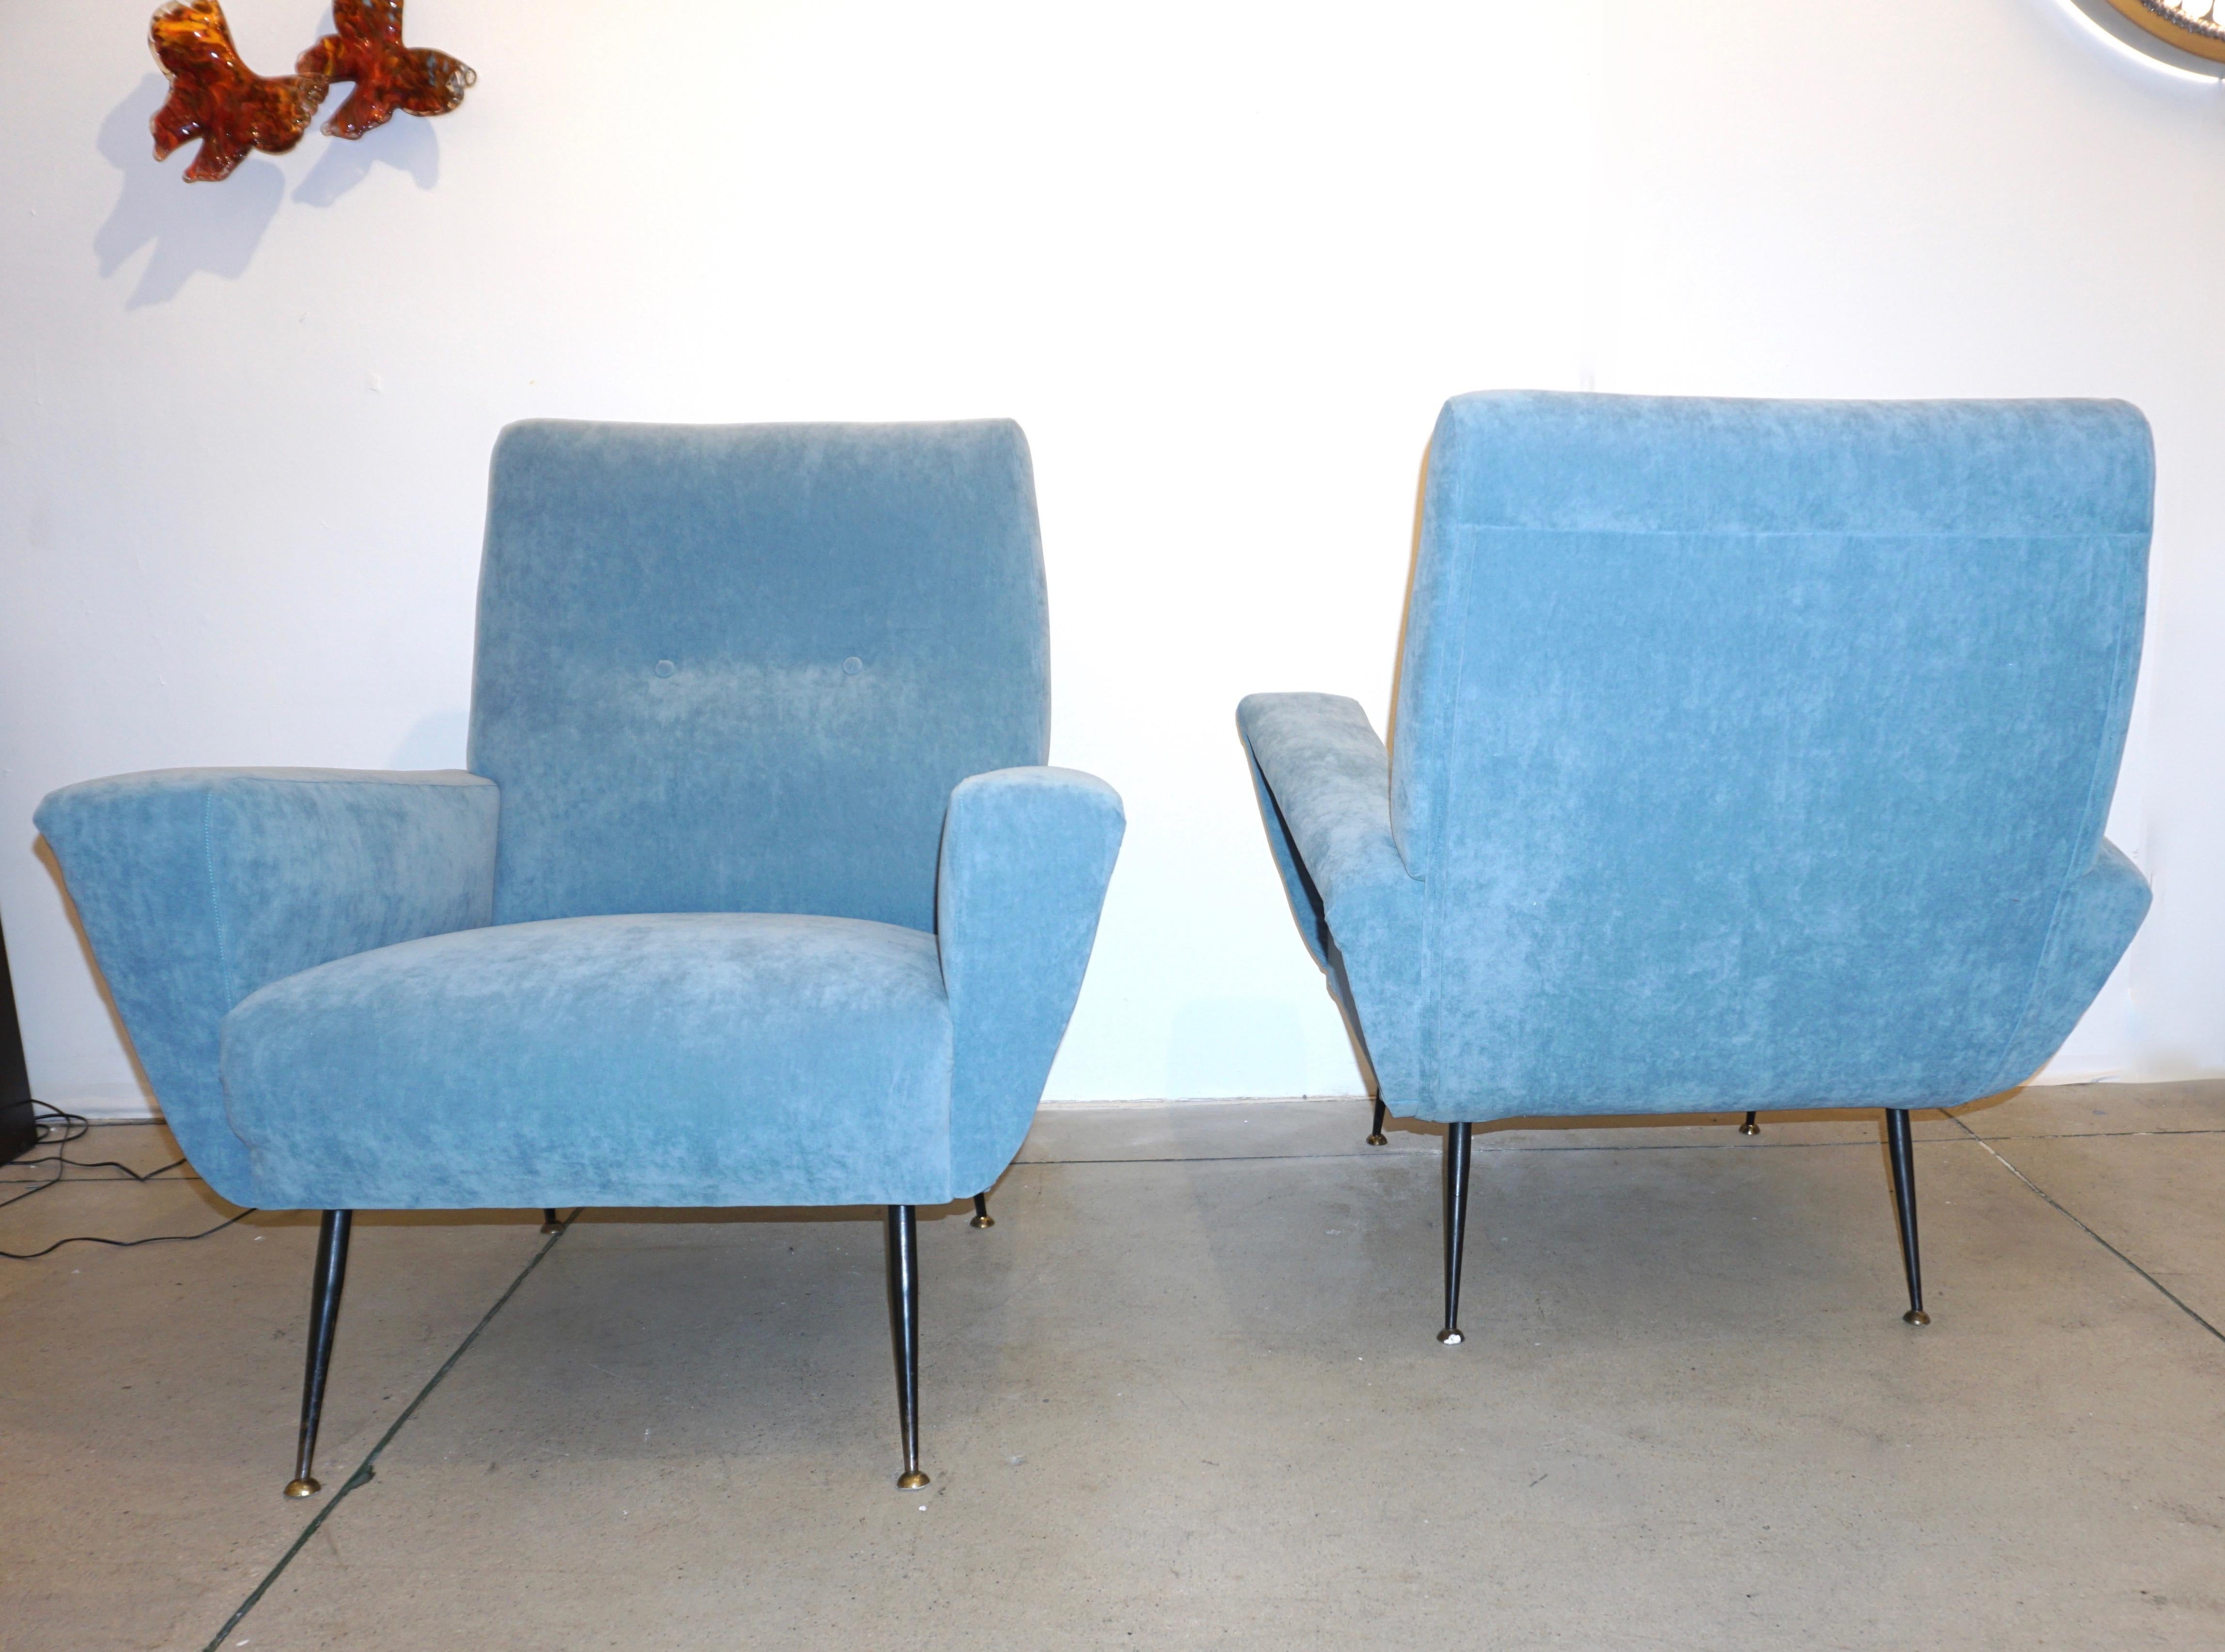 An elegant Italian Mid-Century Modern pair of very comfortable living room armchairs of great execution, the design is superb with a slightly curved back and the side edges protruding to create the armrests and to enhance the shape, reupholstered in